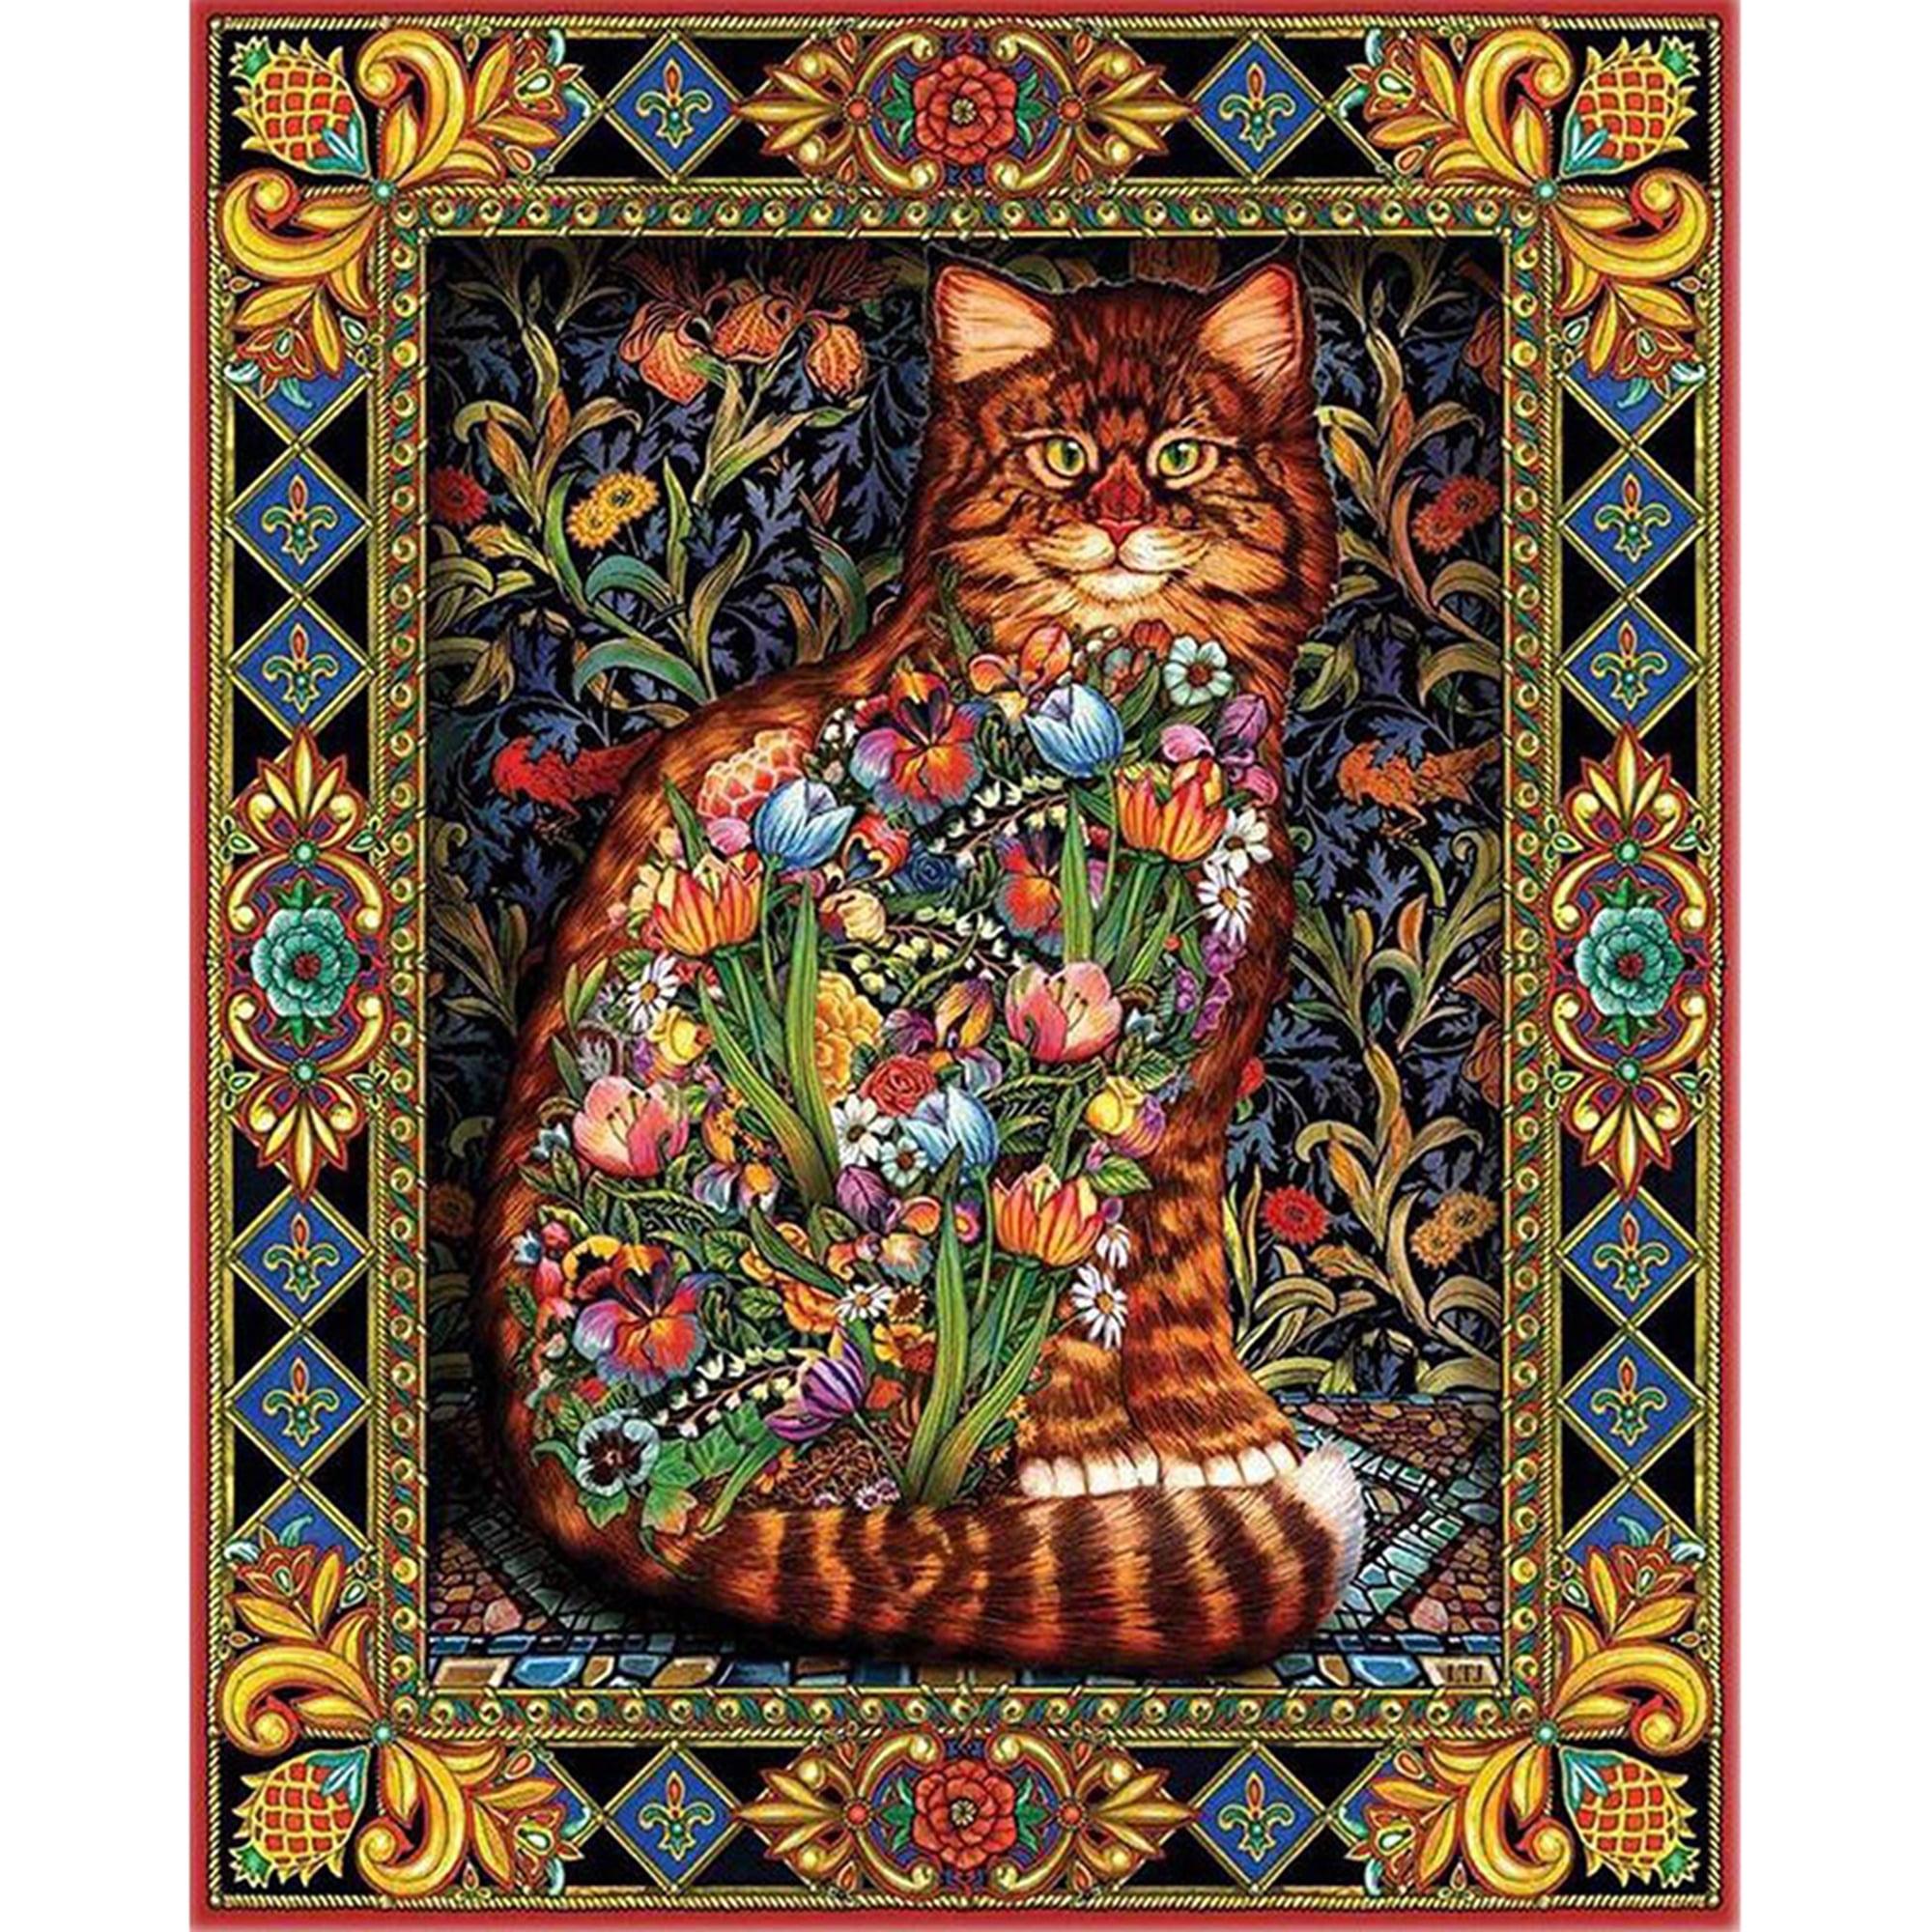 DIY Cat Full Drill 5D Diamond Painting Cross Stitch Pictures Kits Mural Decors 